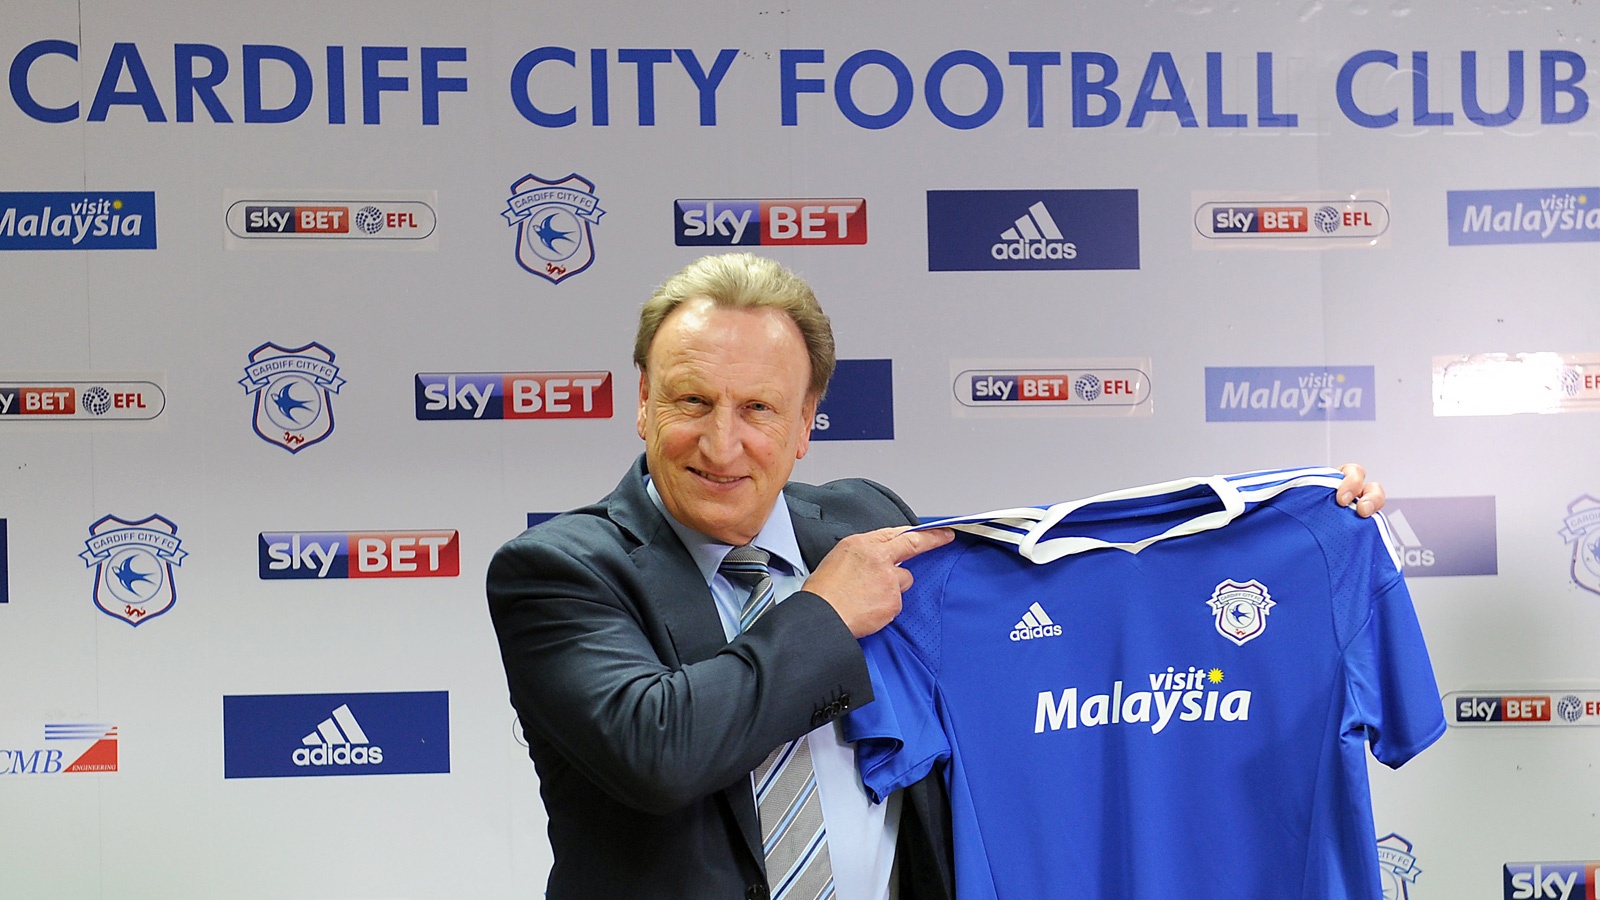 🤝 Welcome to the Welsh - Cardiff City Football Club